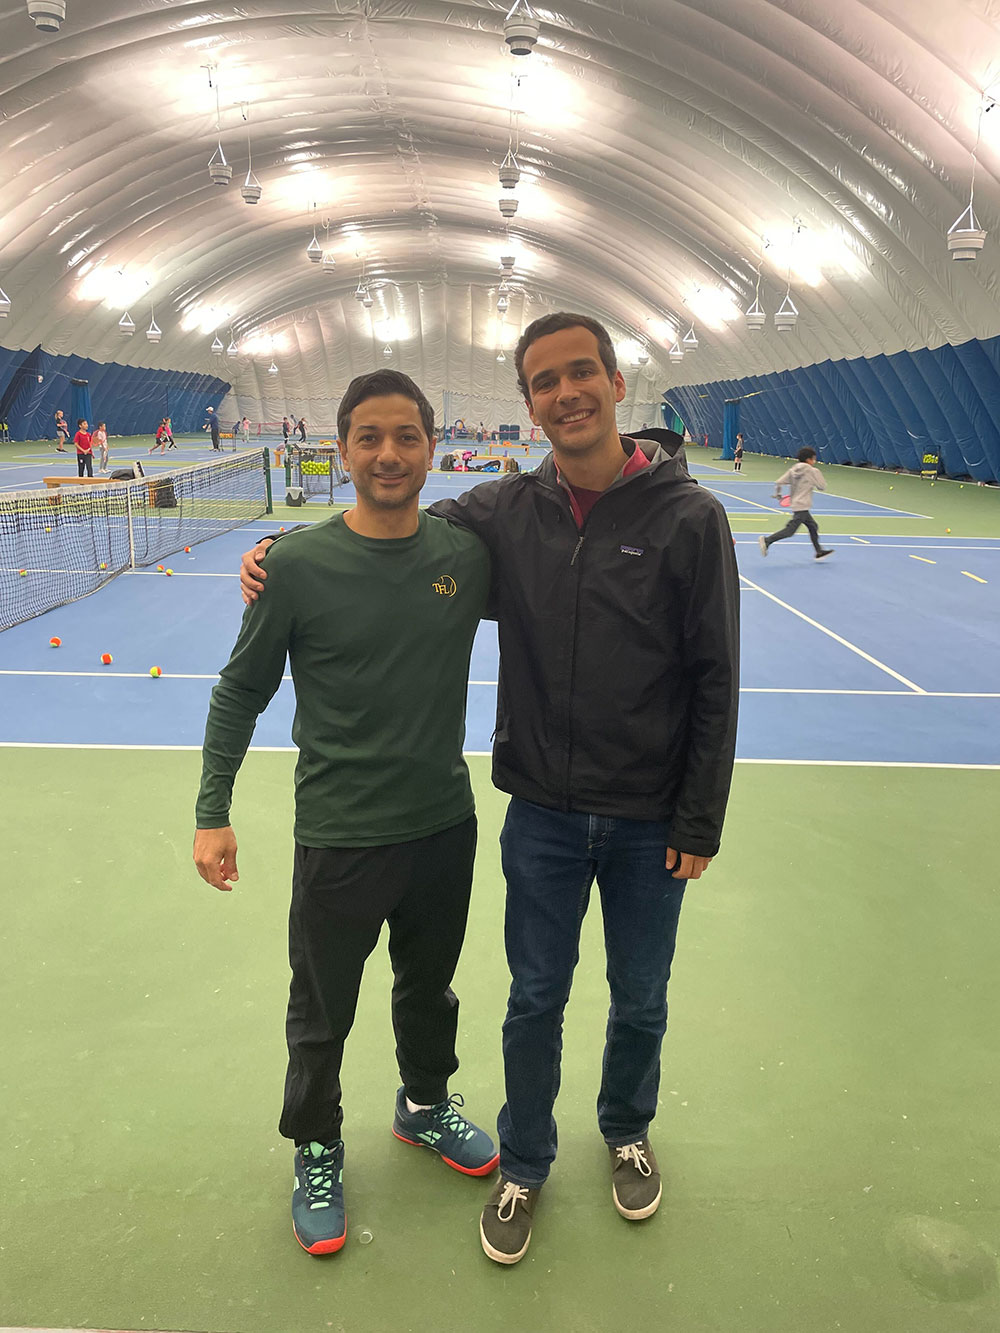 Hassan Askari, left, and Josh Kozelj, right stand with their arms around each other’s shoulders. Hassan is wearing a dark green long-sleeved t-shirt. Kozelj is wearing a black rain jacket. They are both standing on green turf at the Coquitlam Tennis Centre, an indoor tennis centre with a domed white ceiling visible above them. Behind them, kids practice tennis on blue indoor courts with white lines.